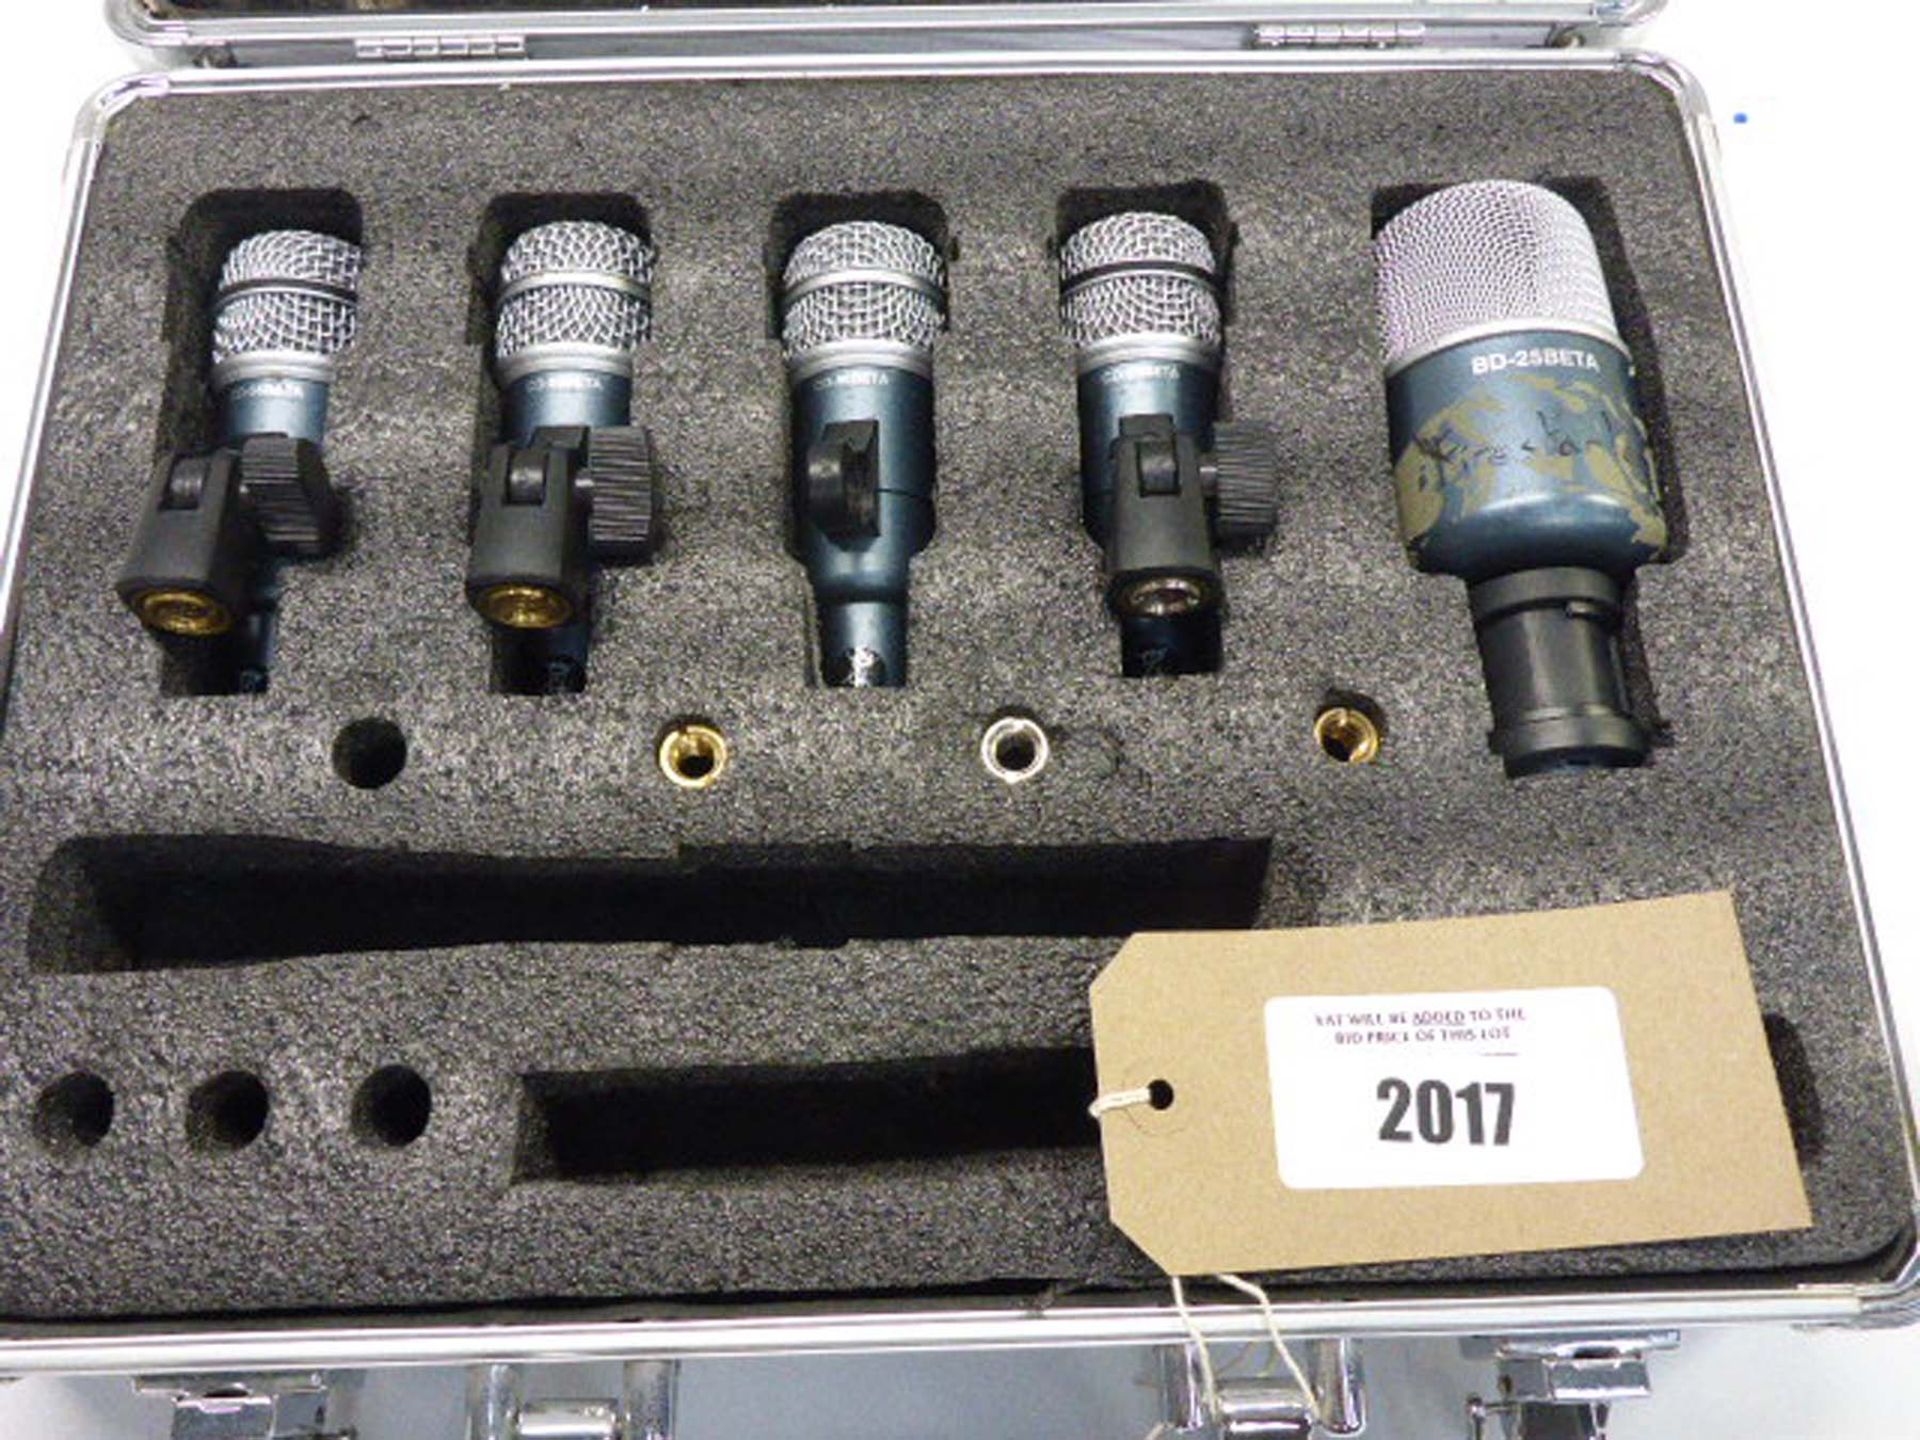 T-Bone Microphone set in fitted case, Four CD-56Beta Mic and One BD-25Beta mic.